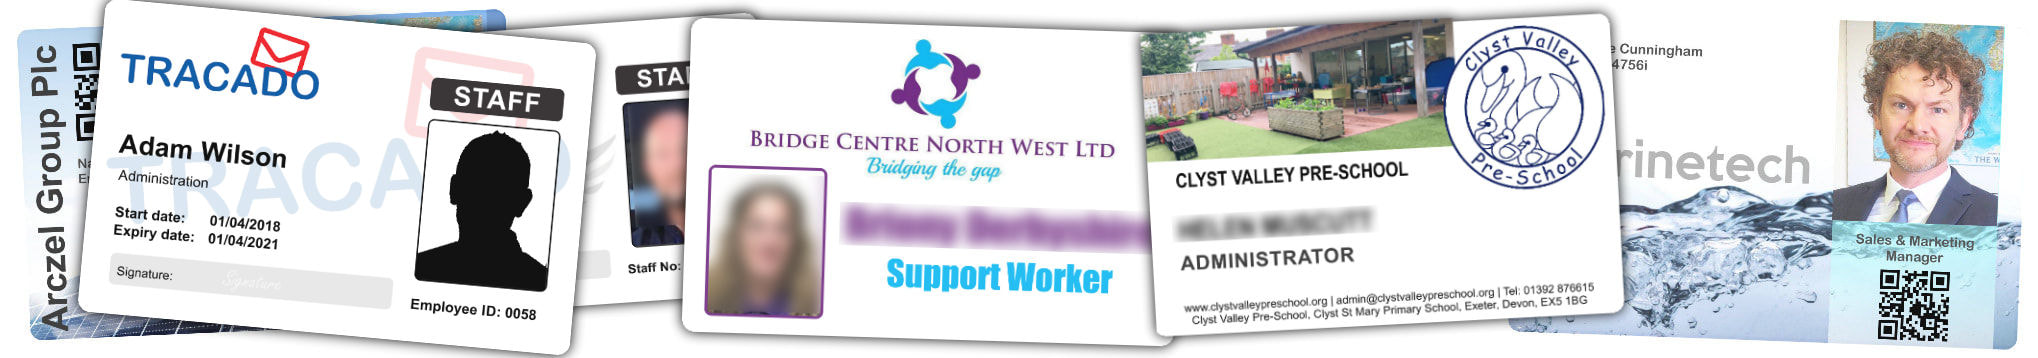 Doncaster examples of staff photo ID cards | samples of employee Identity card printing | Workers ID cards printed in 